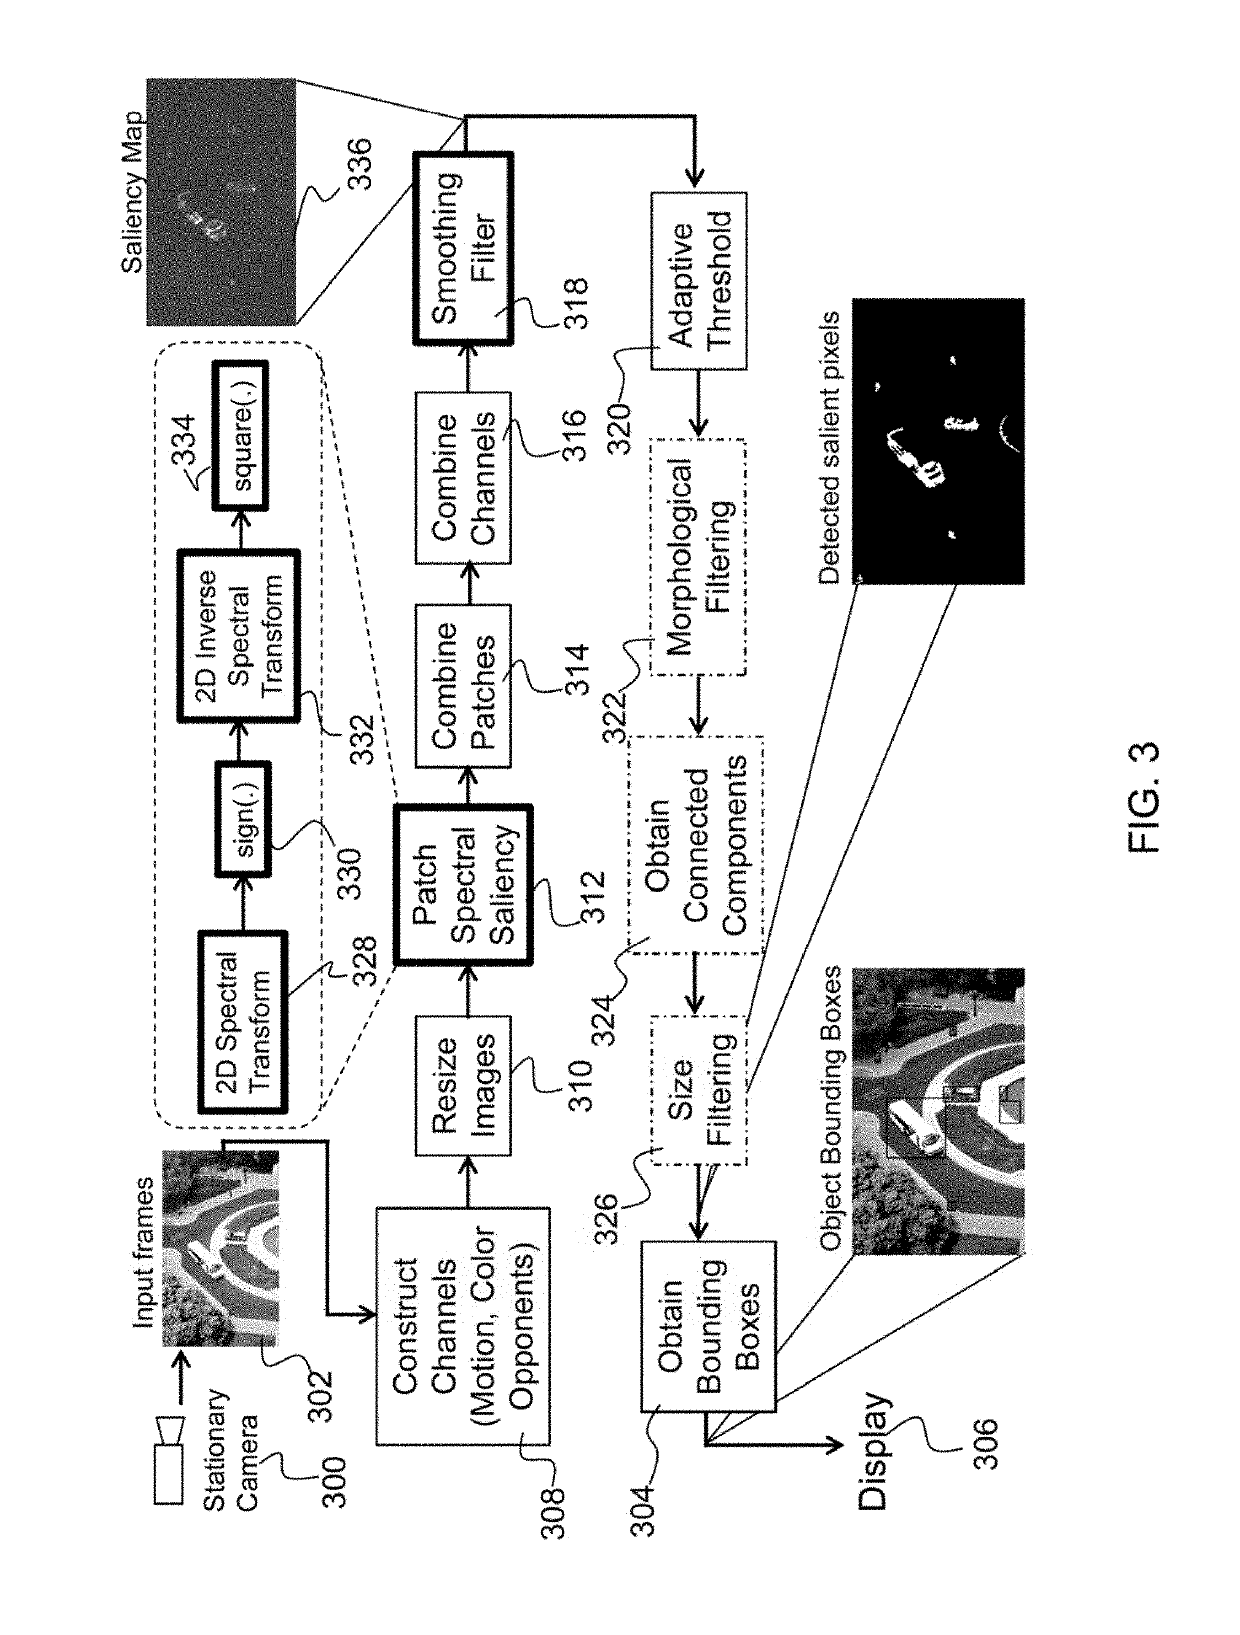 Wide-area salient object detection architecture for low power hardware platforms